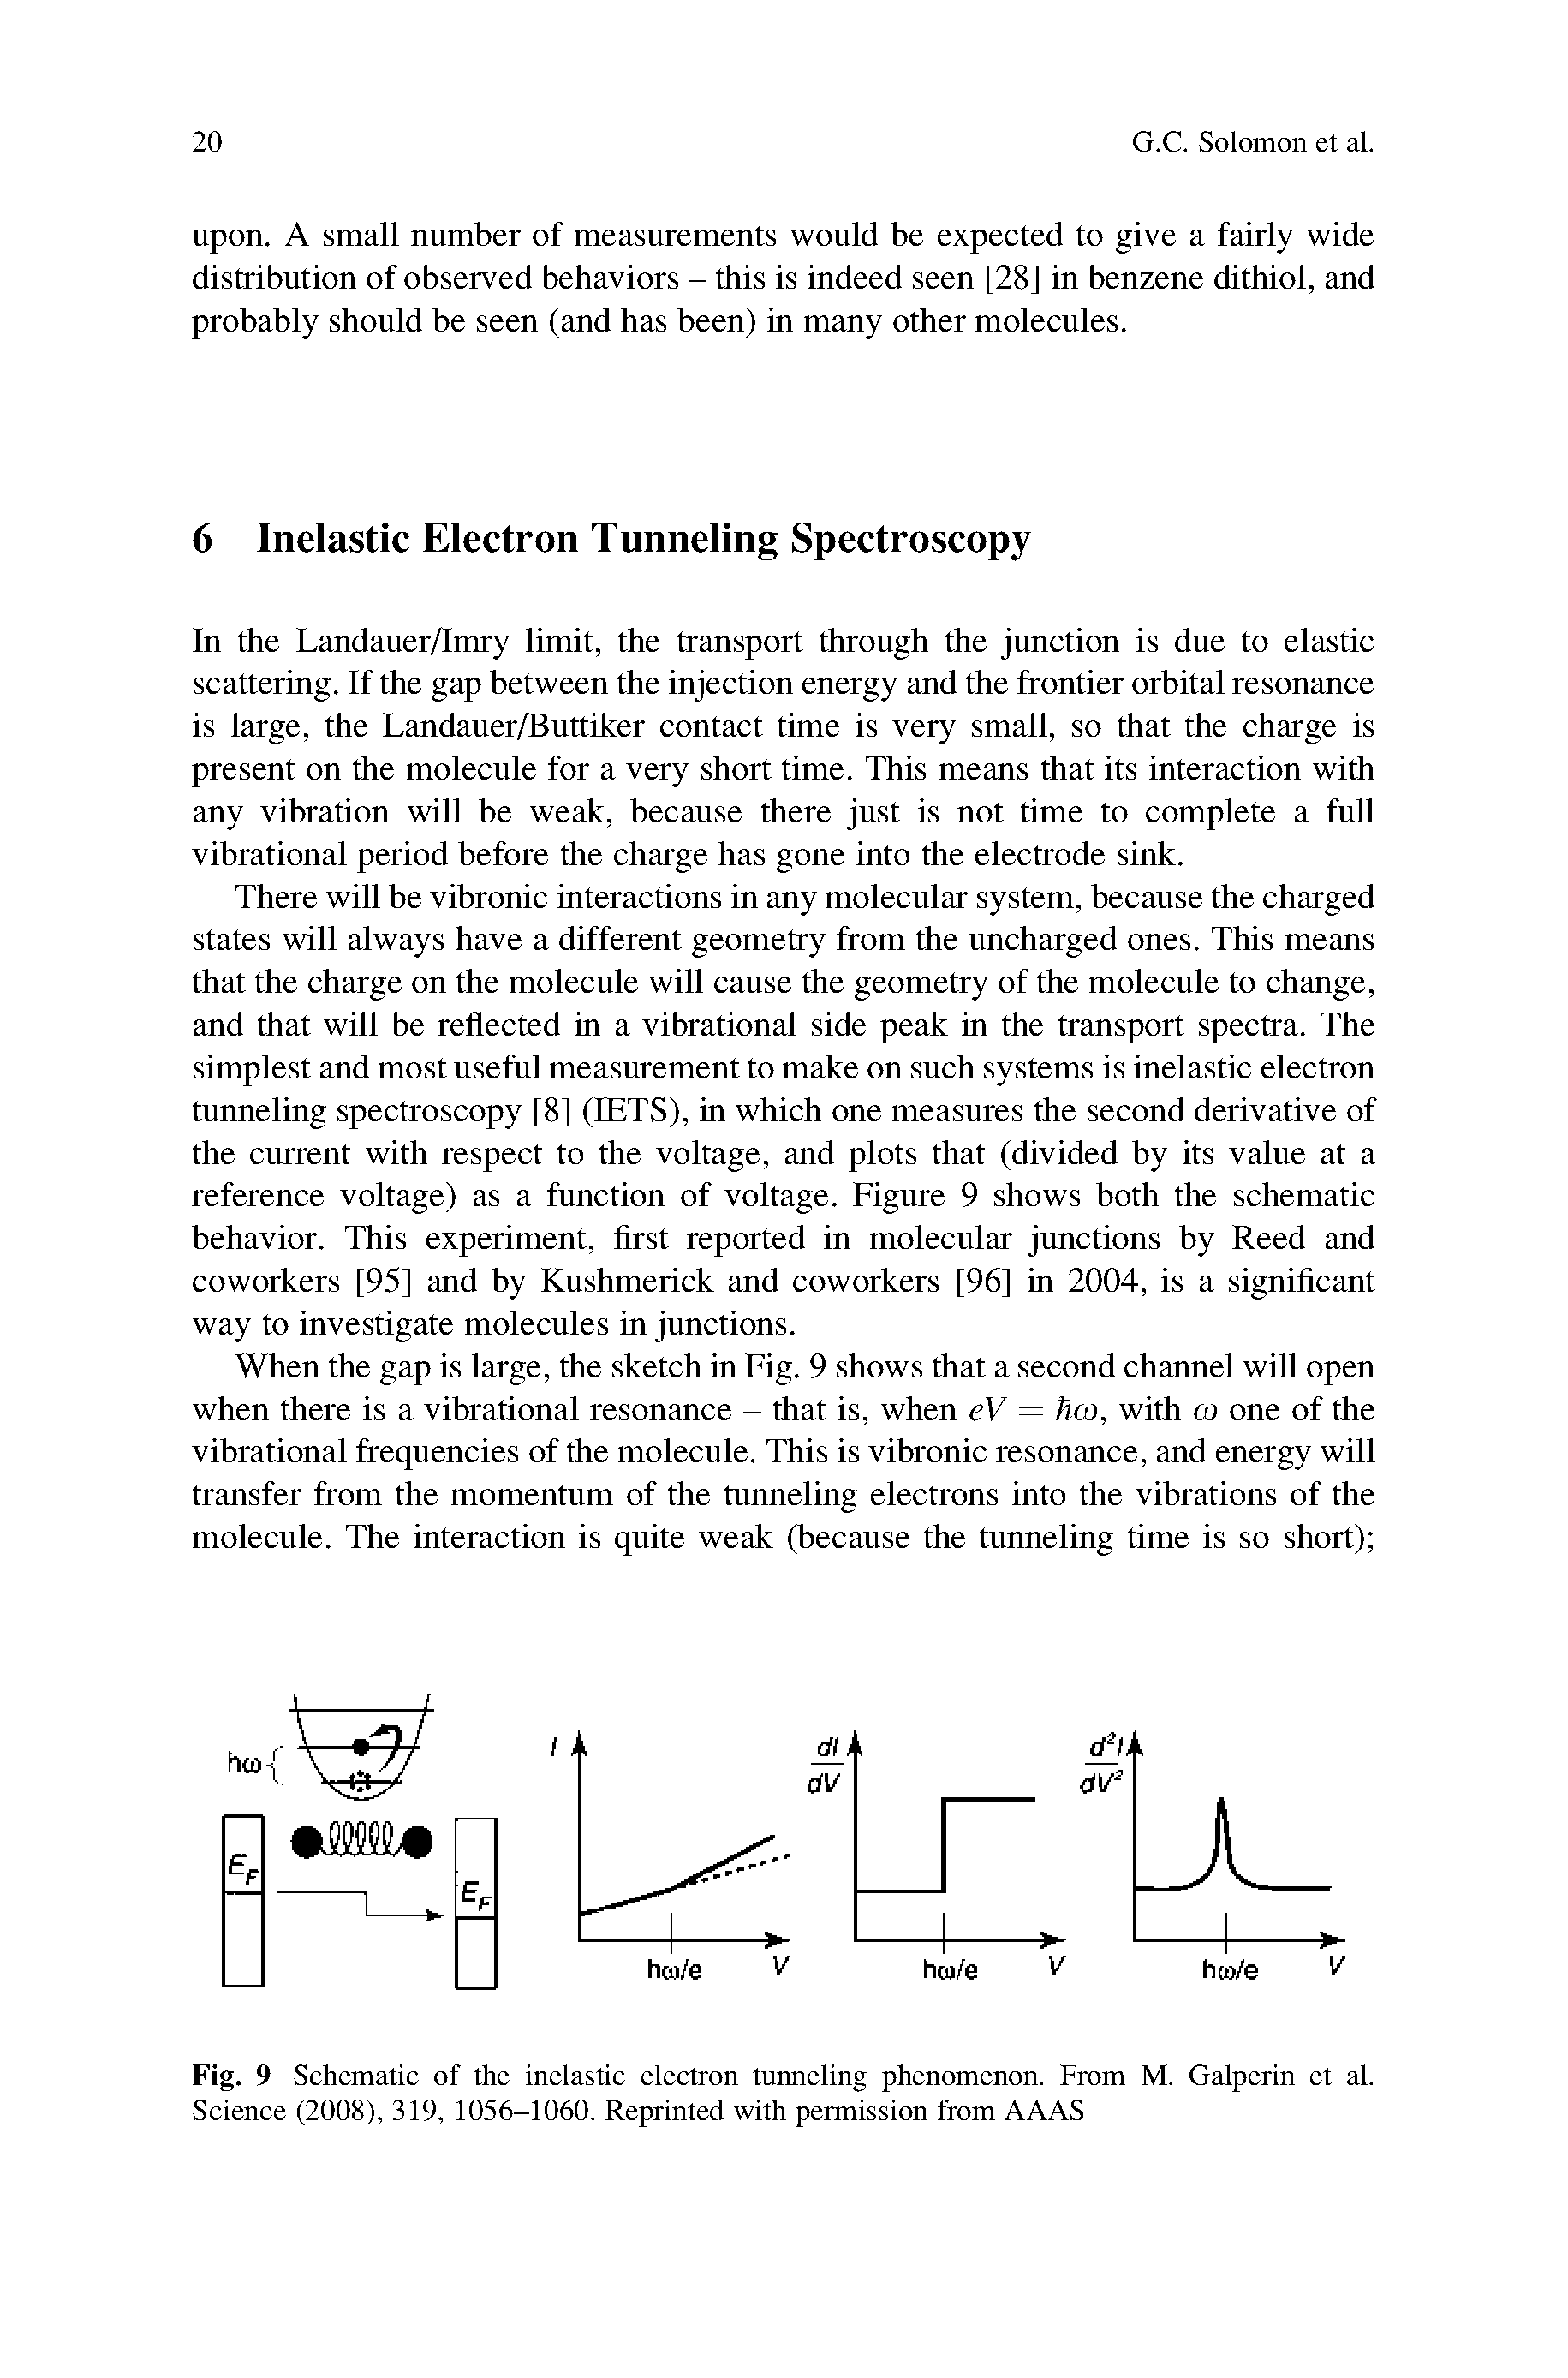 Fig. 9 Schematic of the inelastic electron tunneling phenomenon. From M. Galperin et al. Science (2008), 319, 1056-1060. Reprinted with permission from AAAS...